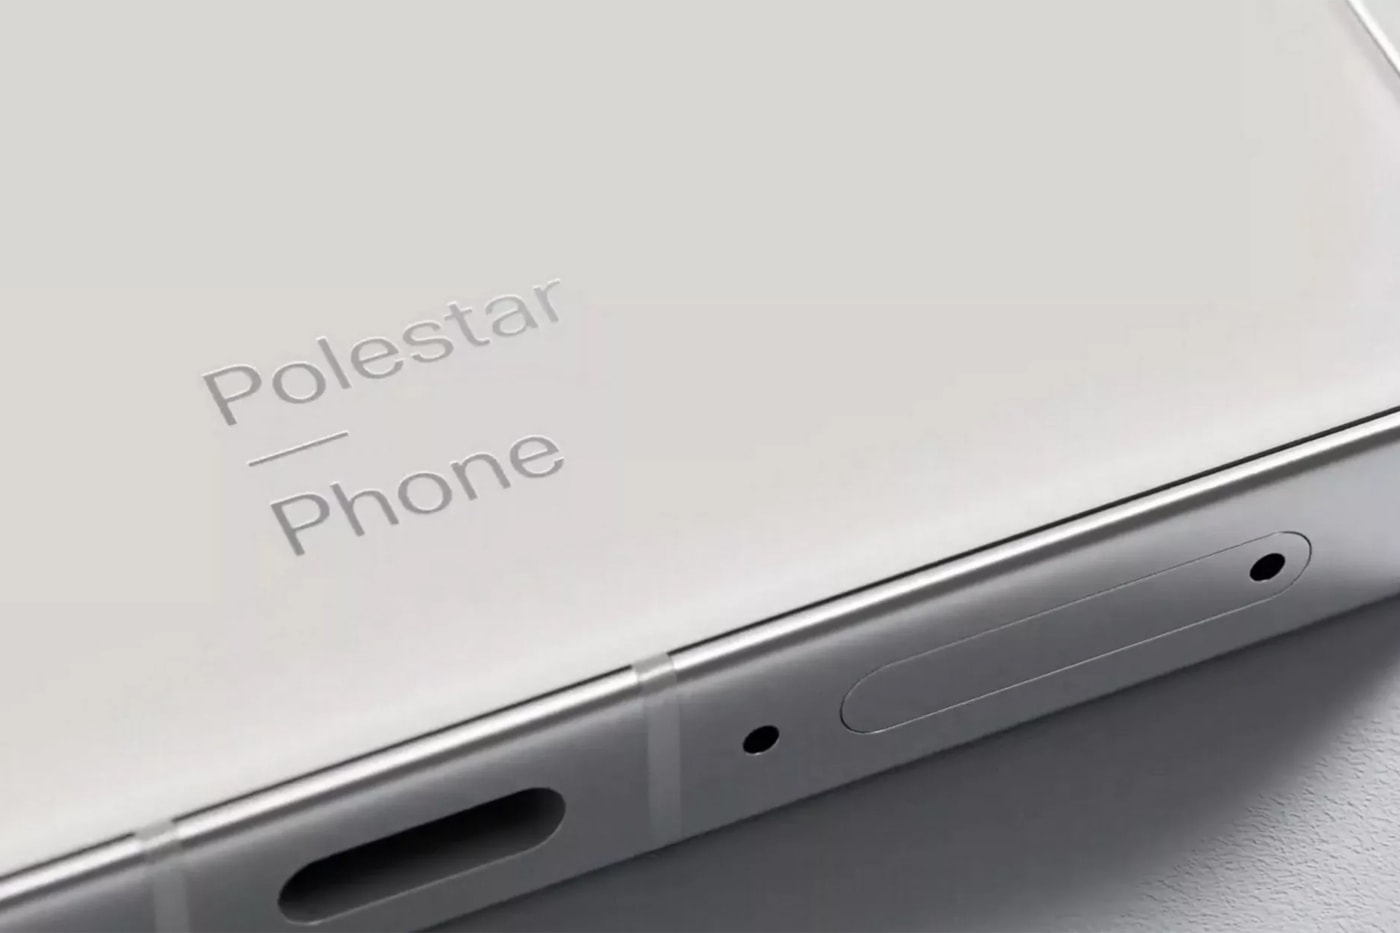 polestar first smartphone meizu joint venture collaboration partnership weibo teaser pics view release date shipments